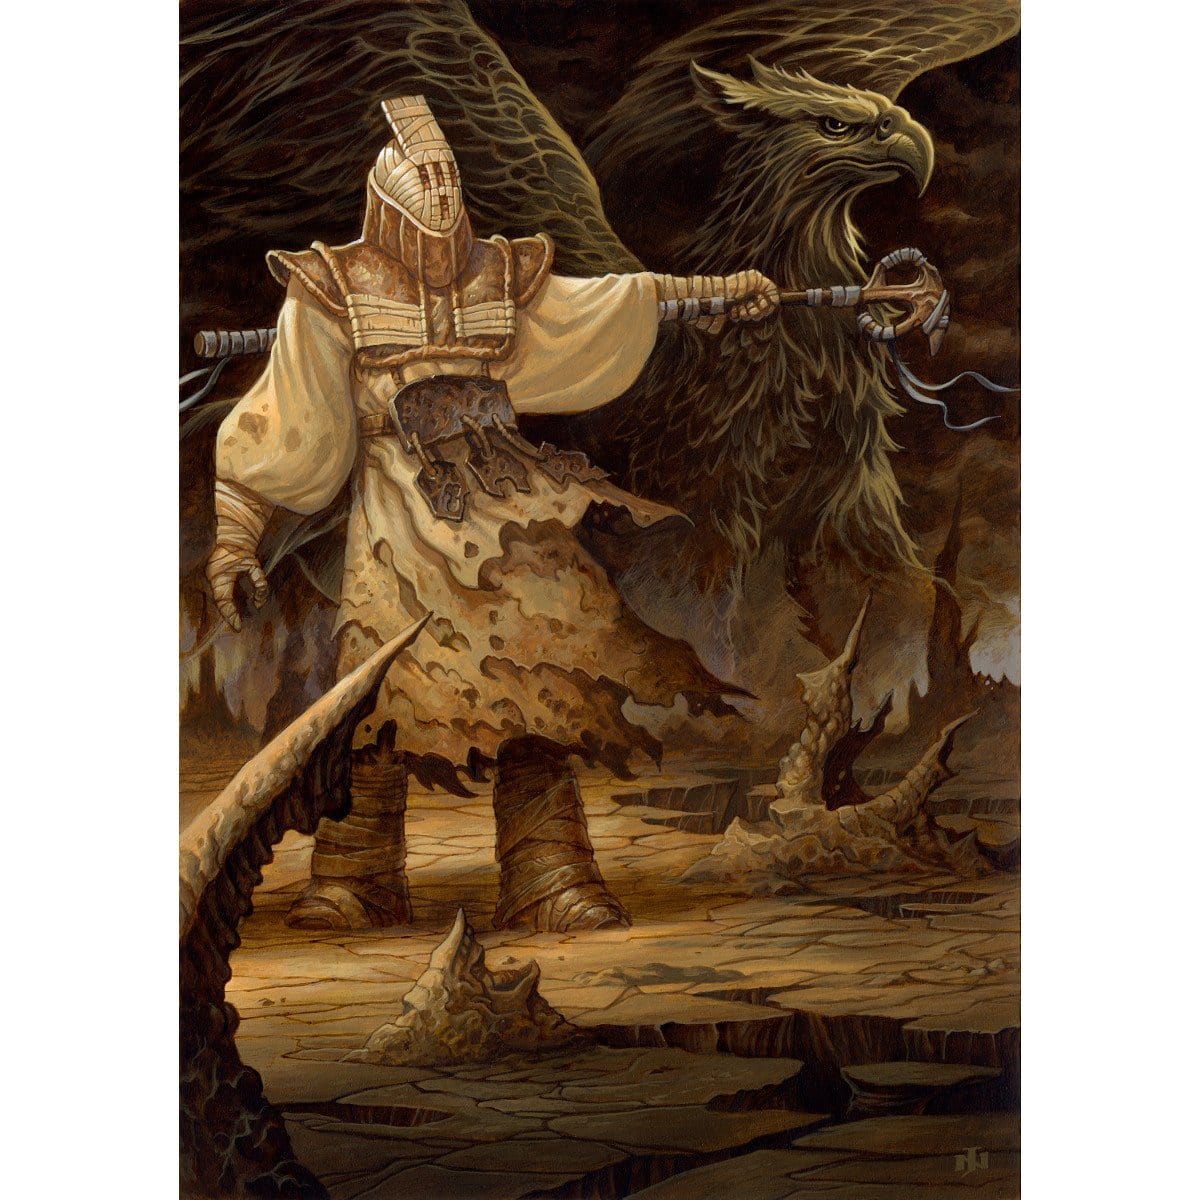 Griffin Guide Print - Print - Original Magic Art - Accessories for Magic the Gathering and other card games